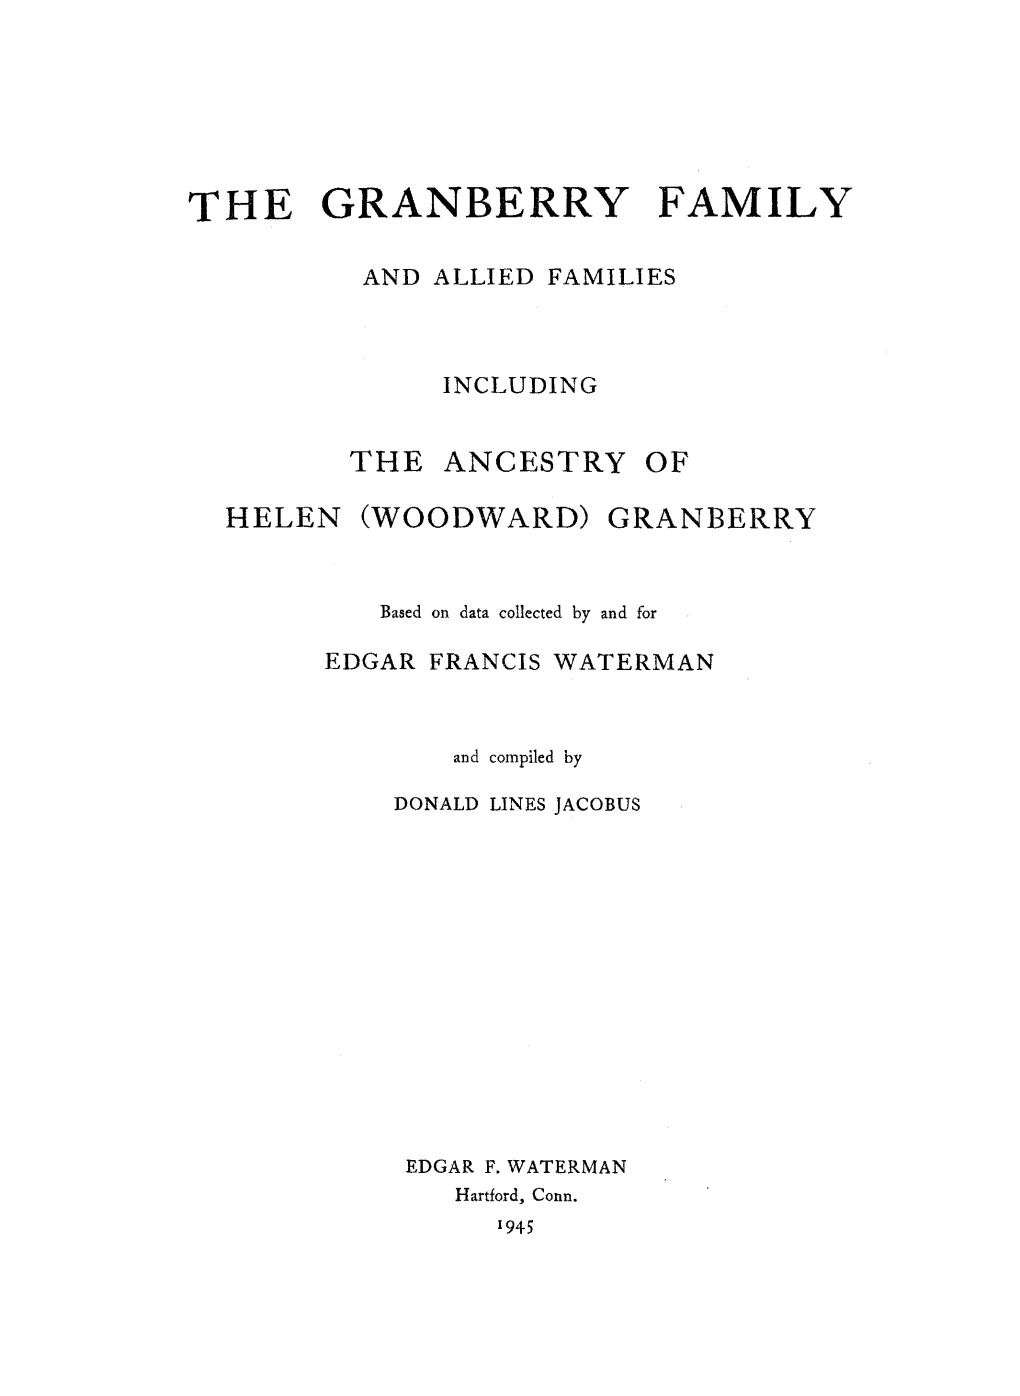 The Granberry Family